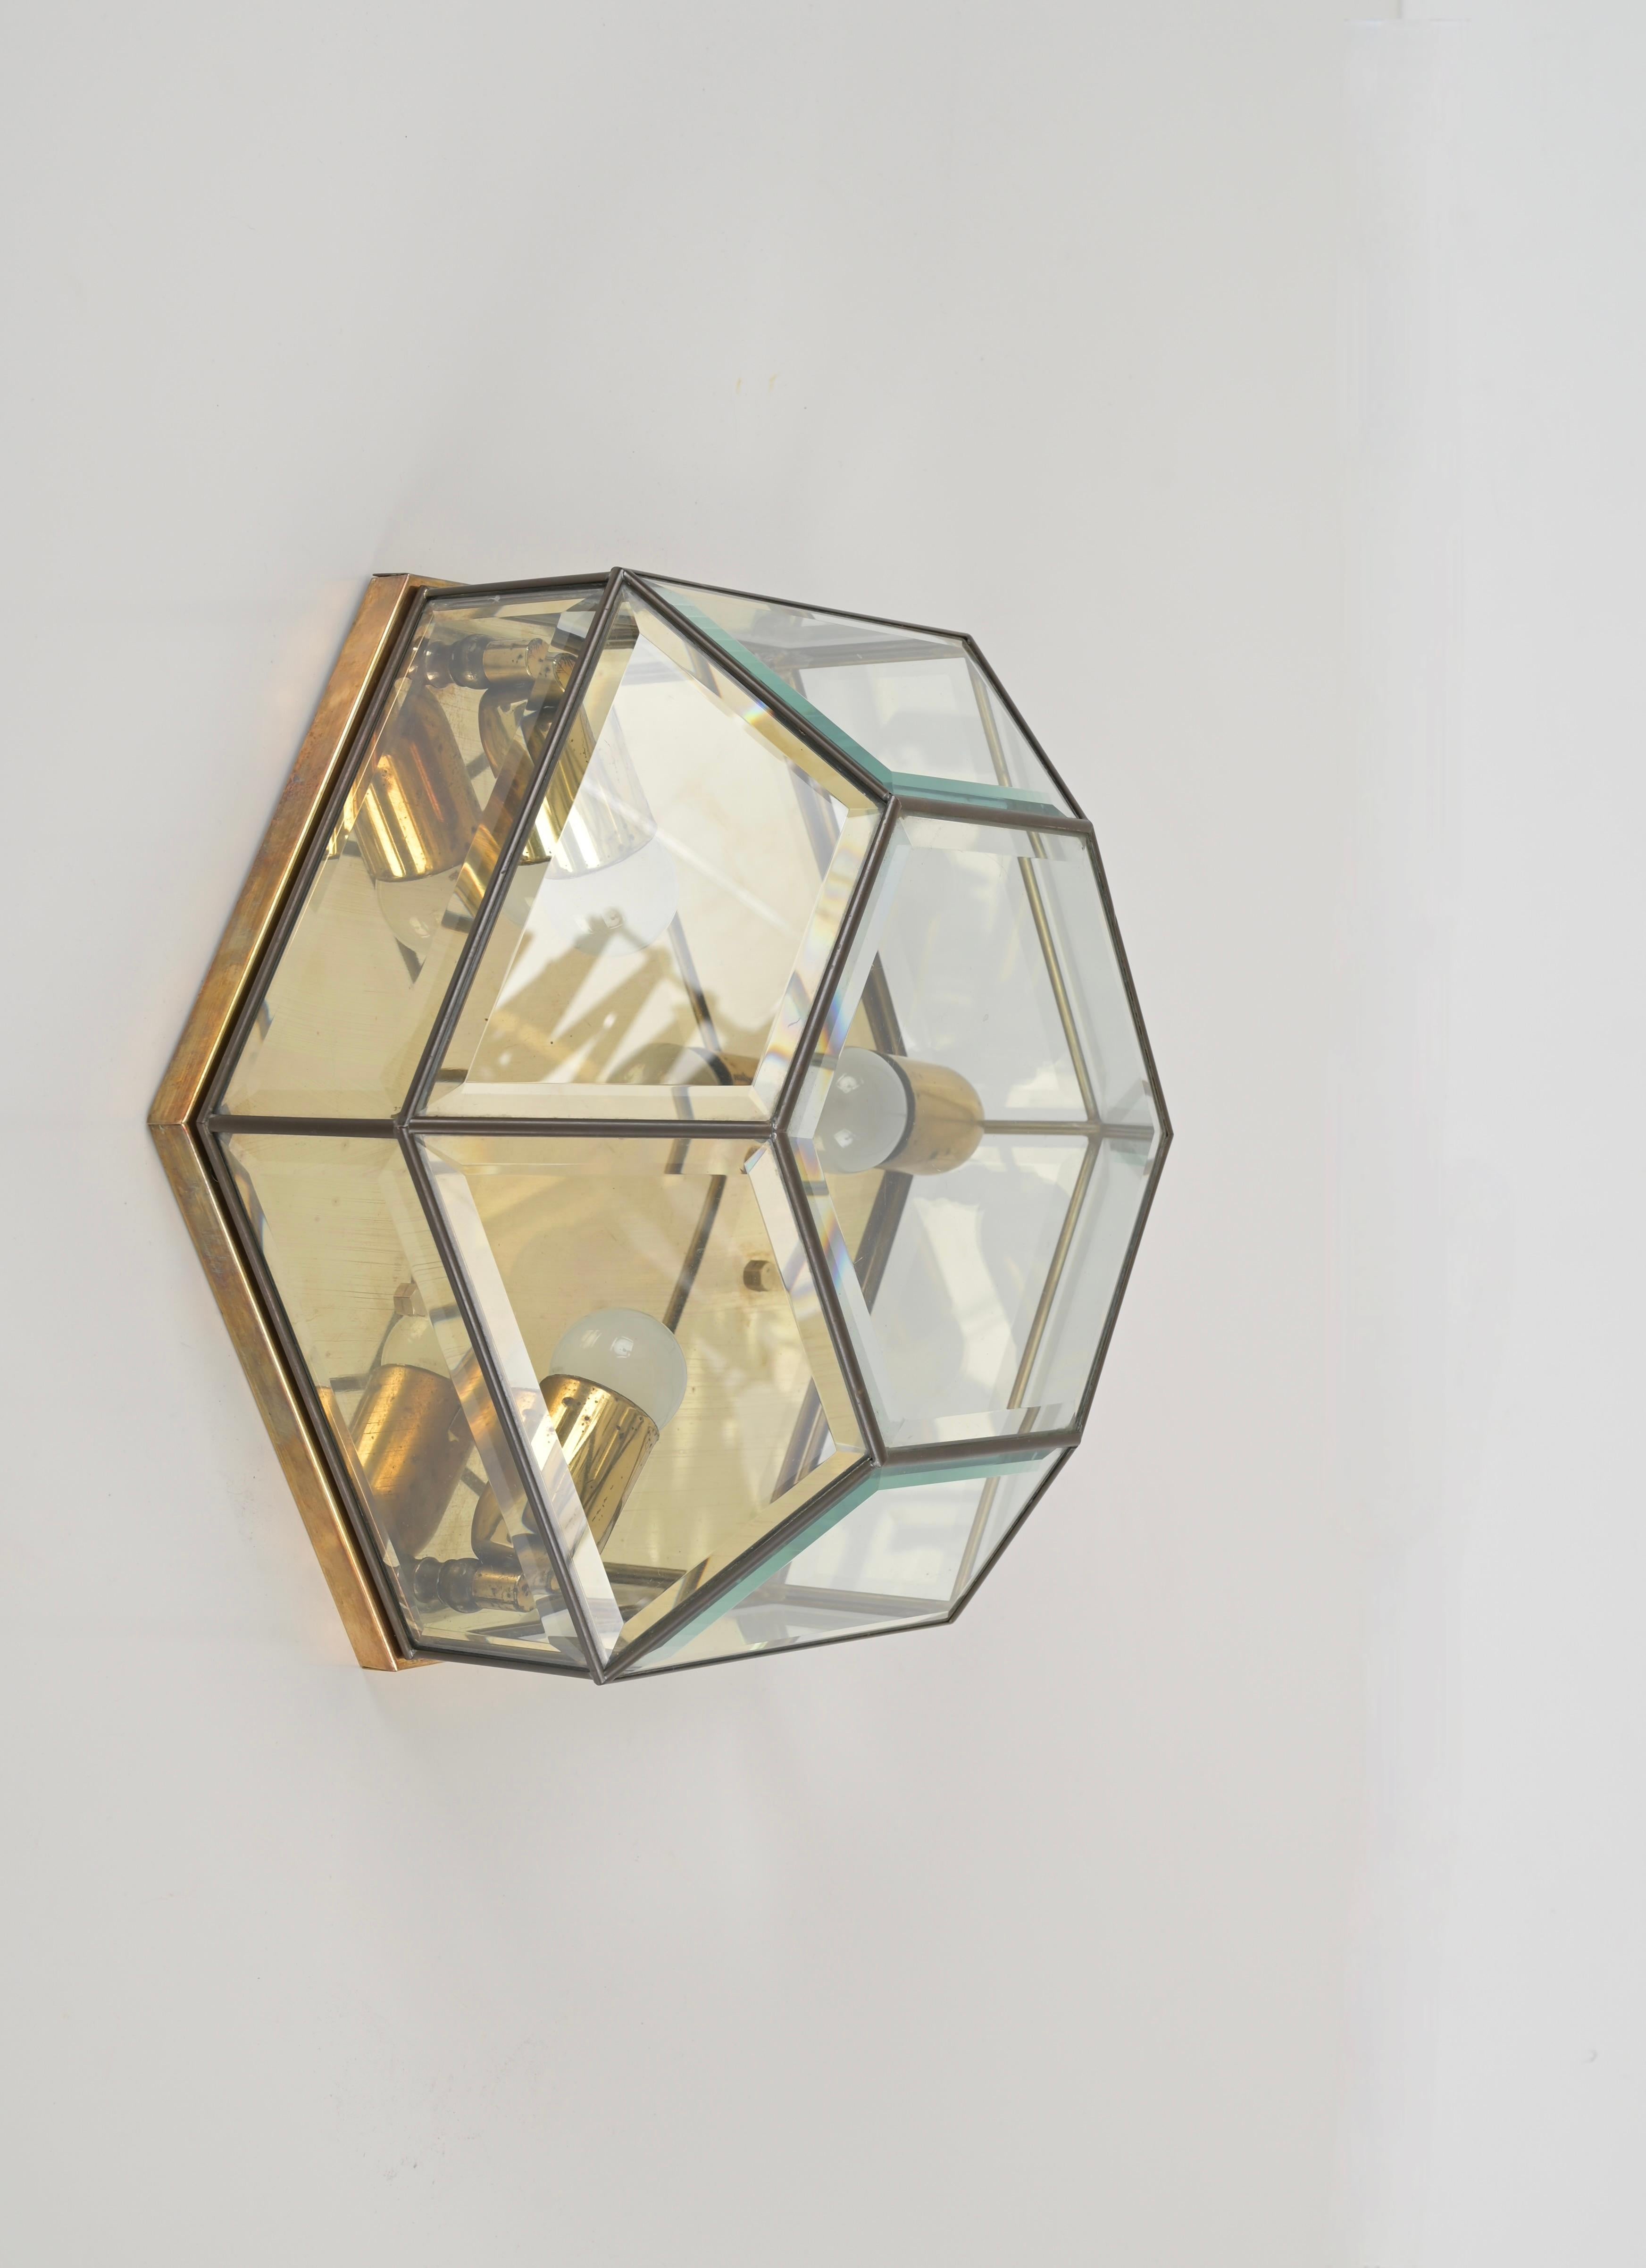 Brass and Beveled Glass Hexagonal Sconce or Ceiling Lamp Fontana Arte Italy 1950 For Sale 2